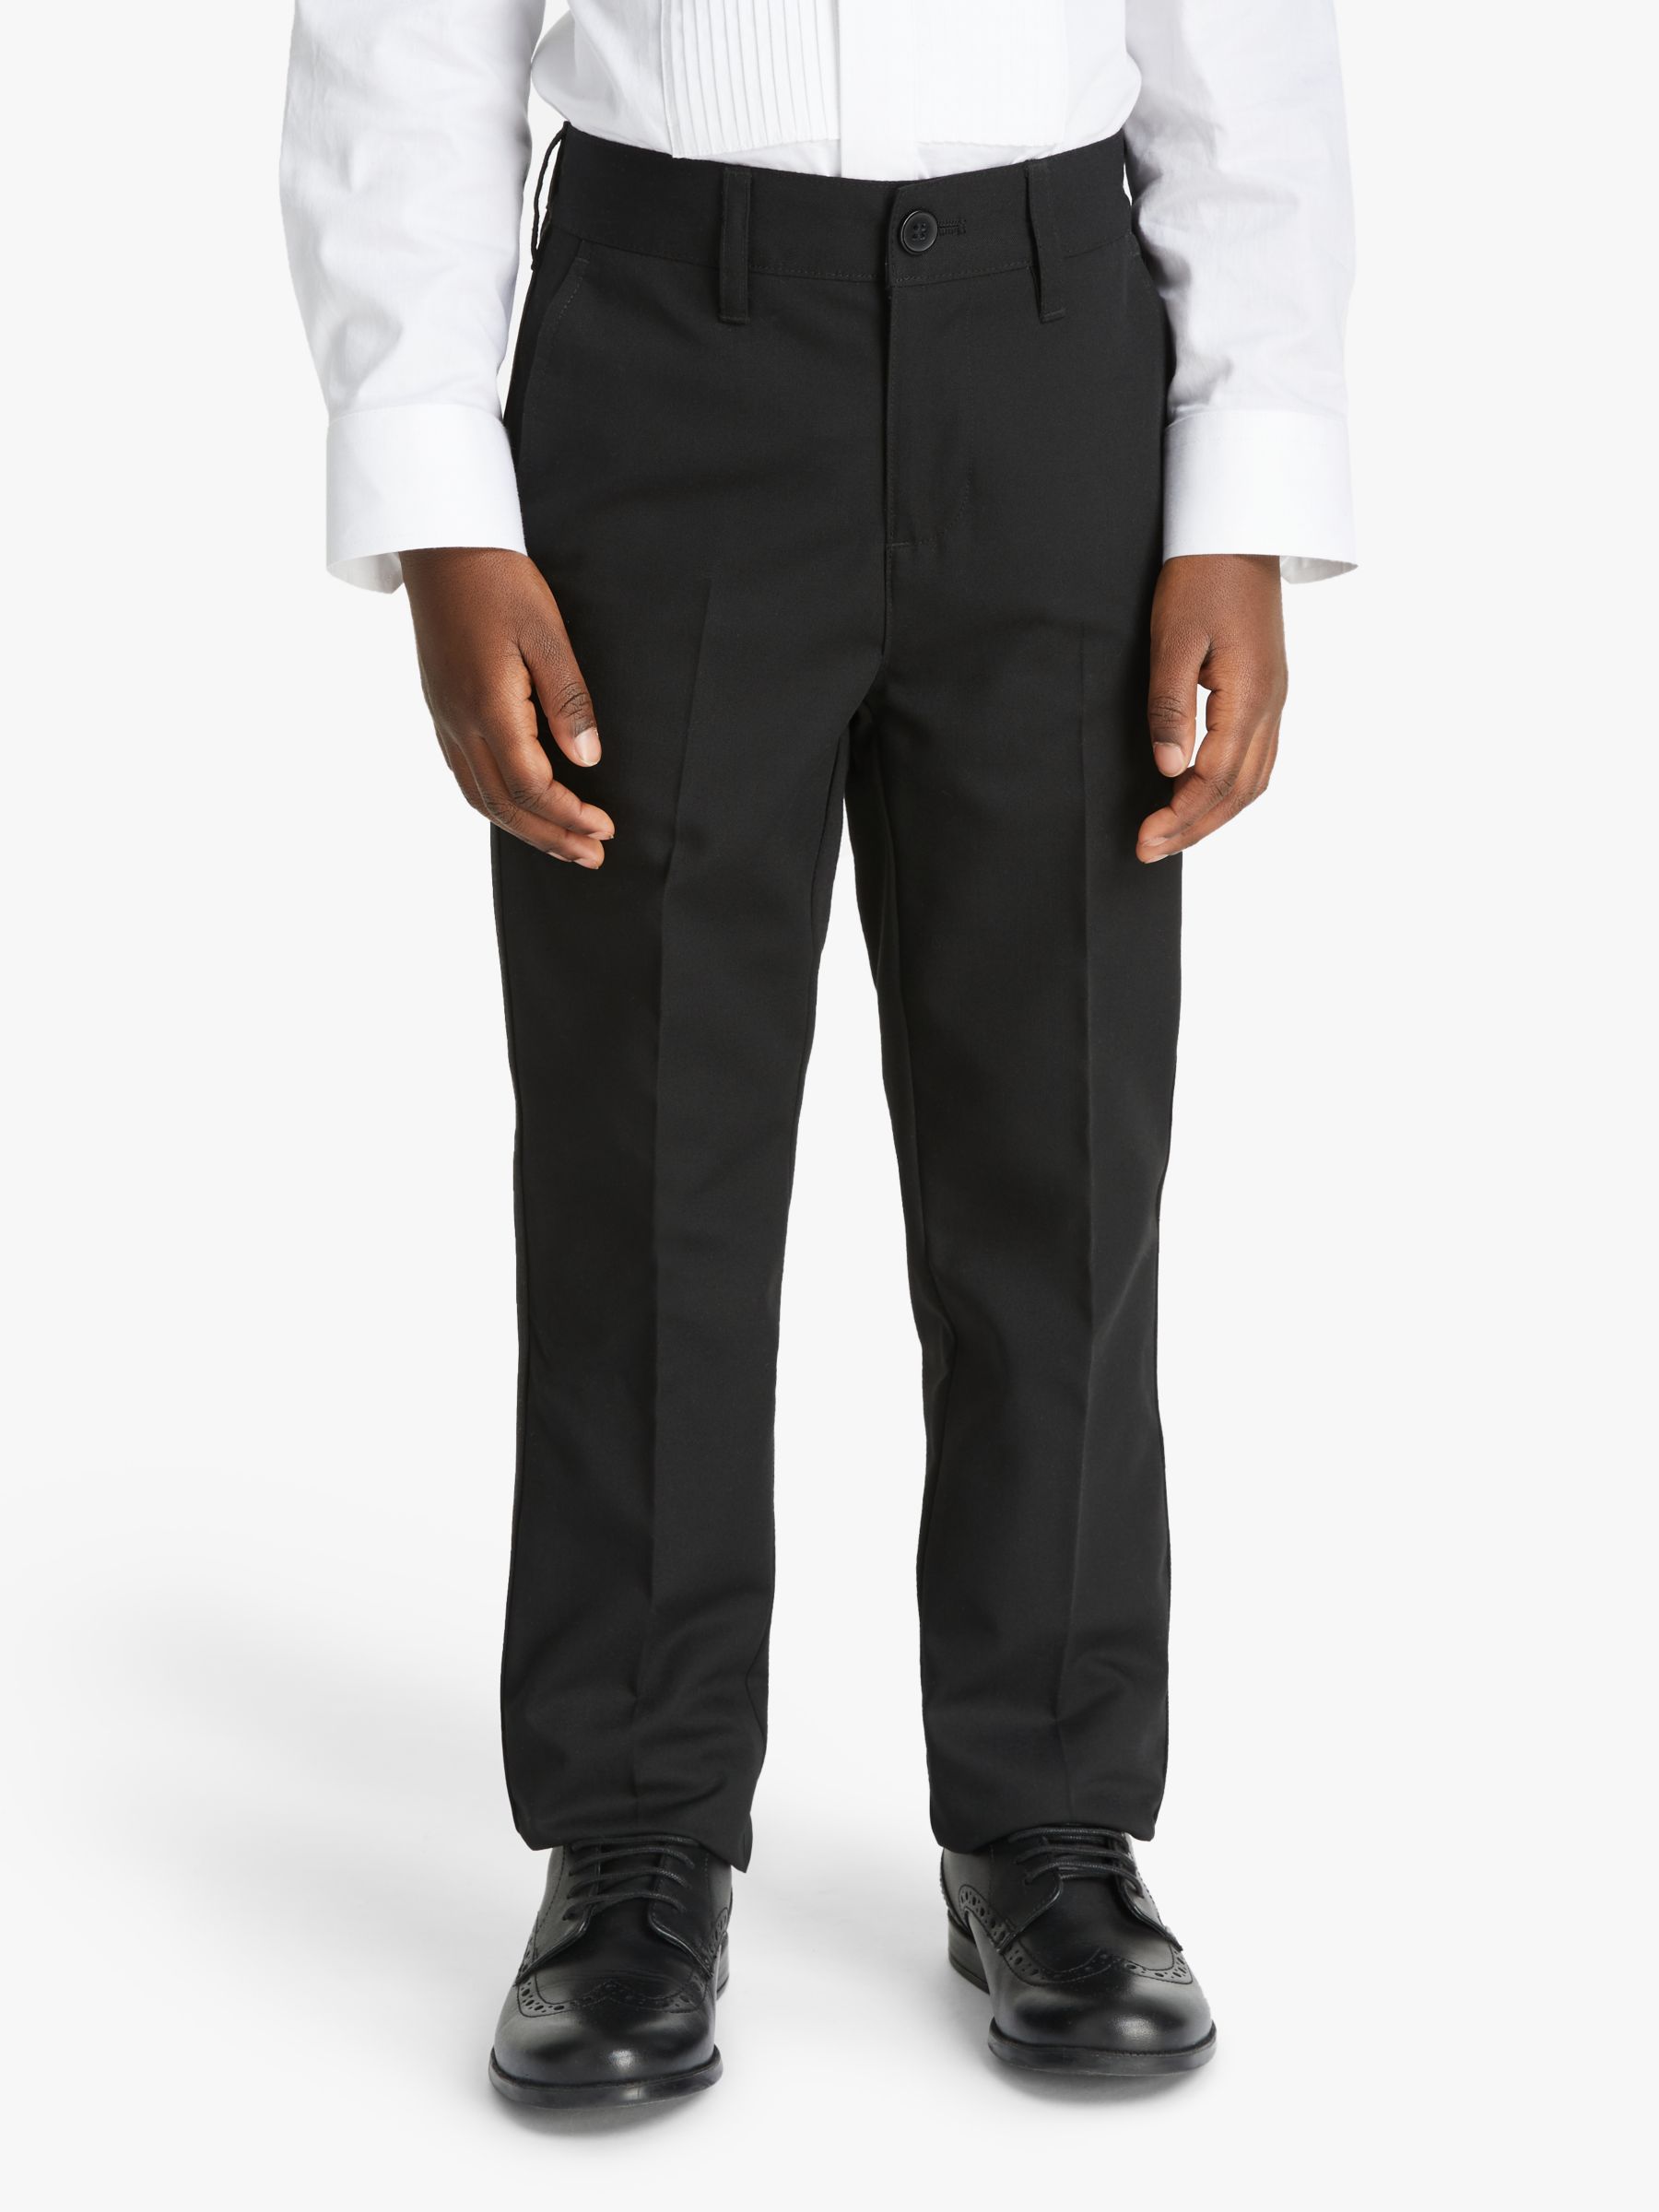 Image of John Lewis and Partners Heirloom Collection Boys Tuxedo Trousers Black